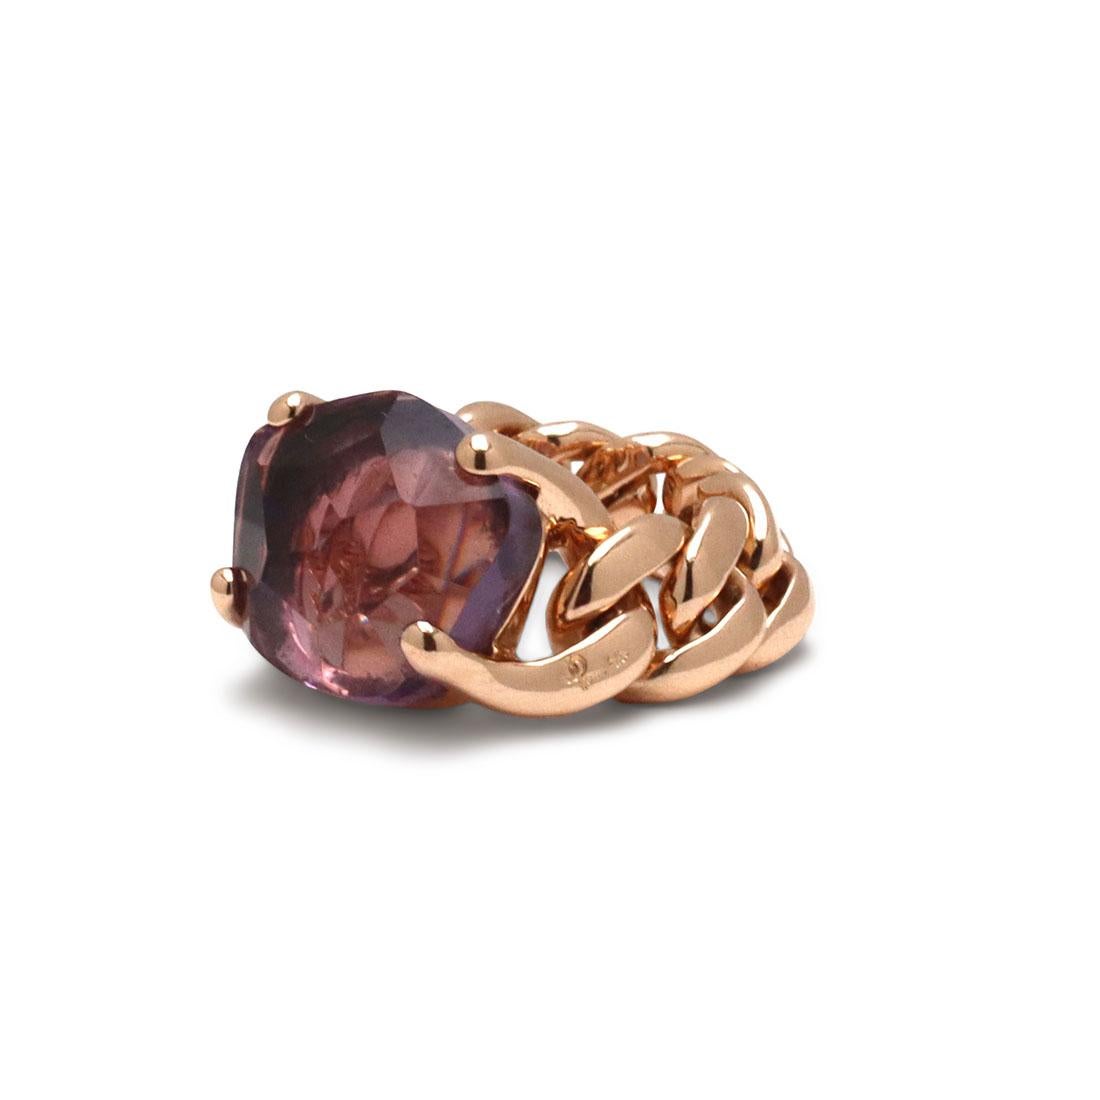 Authentic Pomellato Lola ring crafted in 18 karat rose gold features a faceted amethyst stone set on a curb link chain. The amethyst stone measures 12.6mm in length and 13mm in width. Ring size 6 1/4. Signed Pomellato, 750 with serial number. The